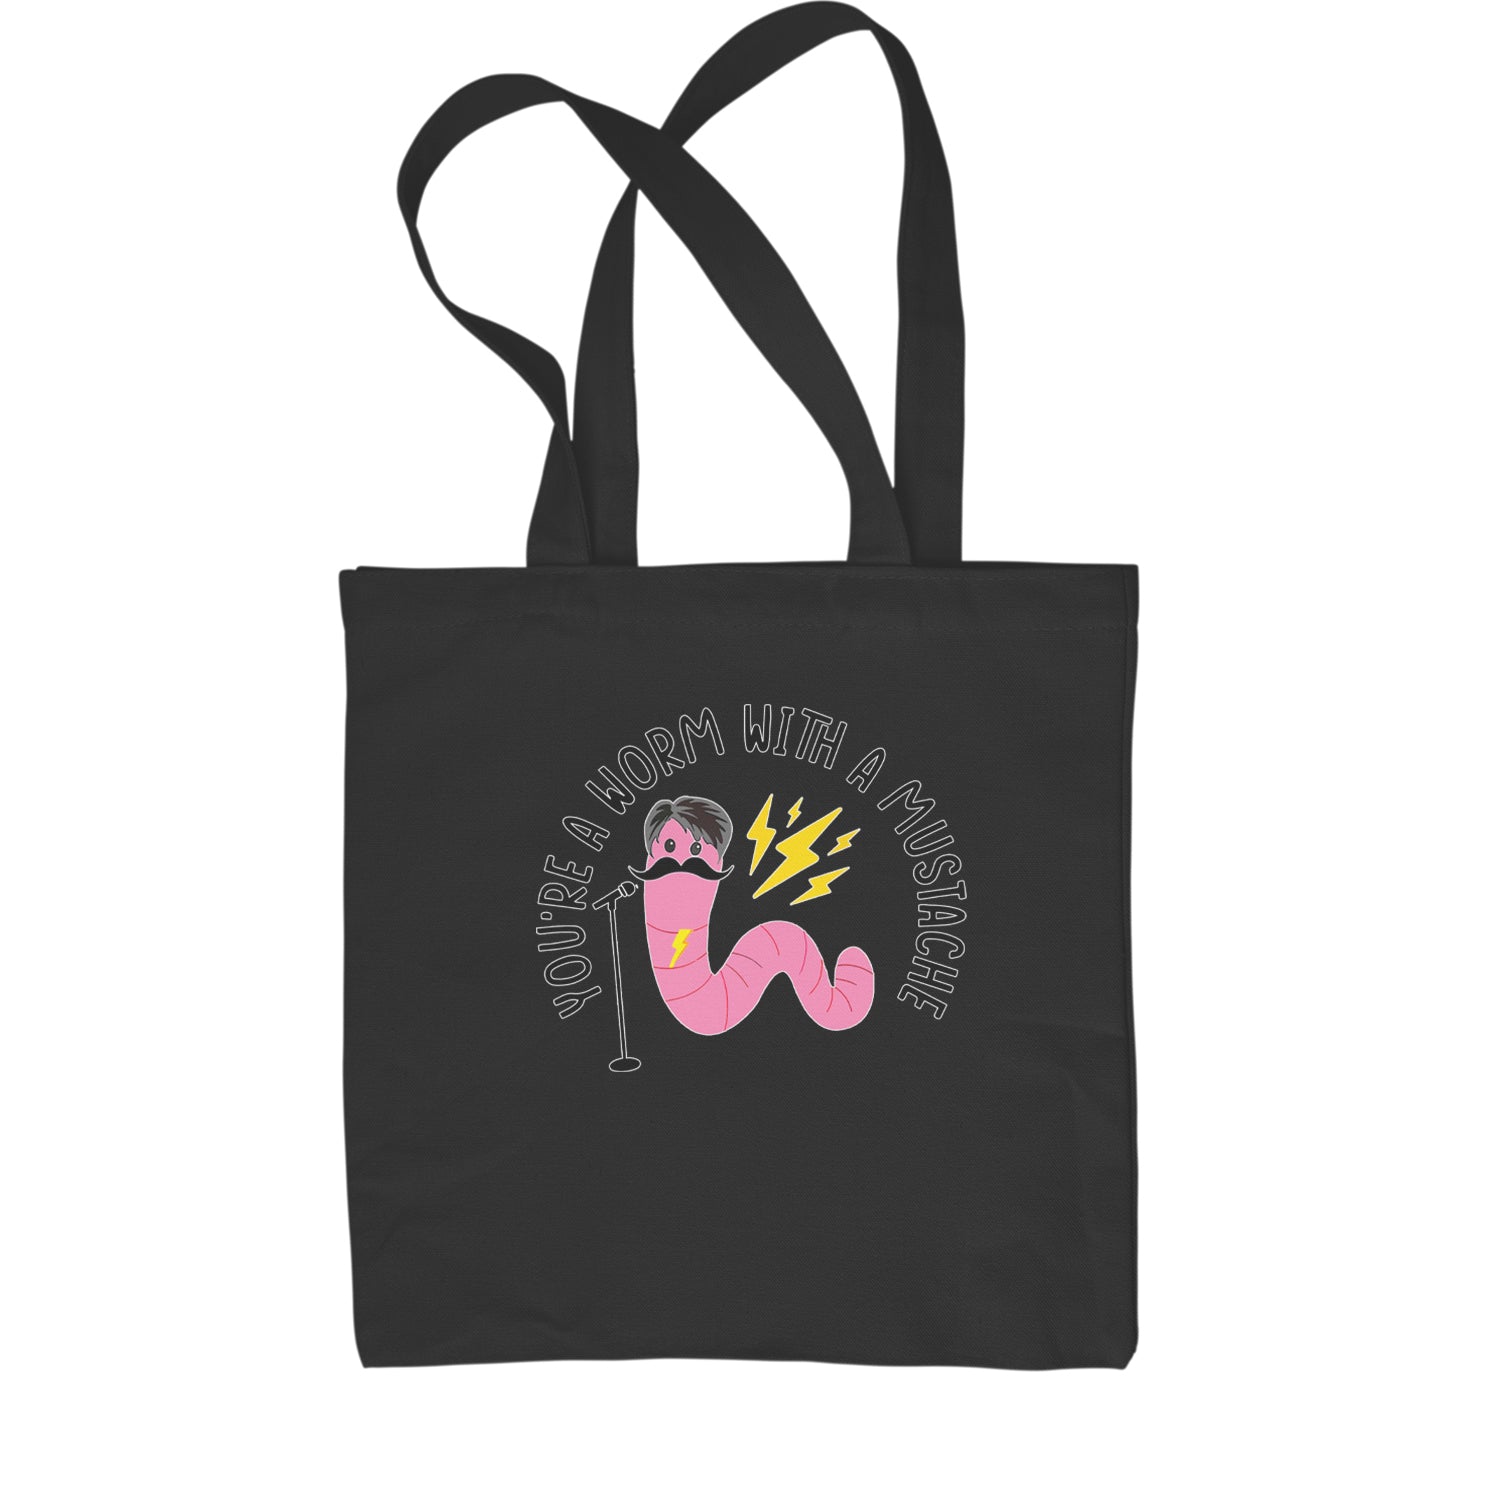 You're A Worm With A Mustache Tom Scandoval Shopping Tote Bag